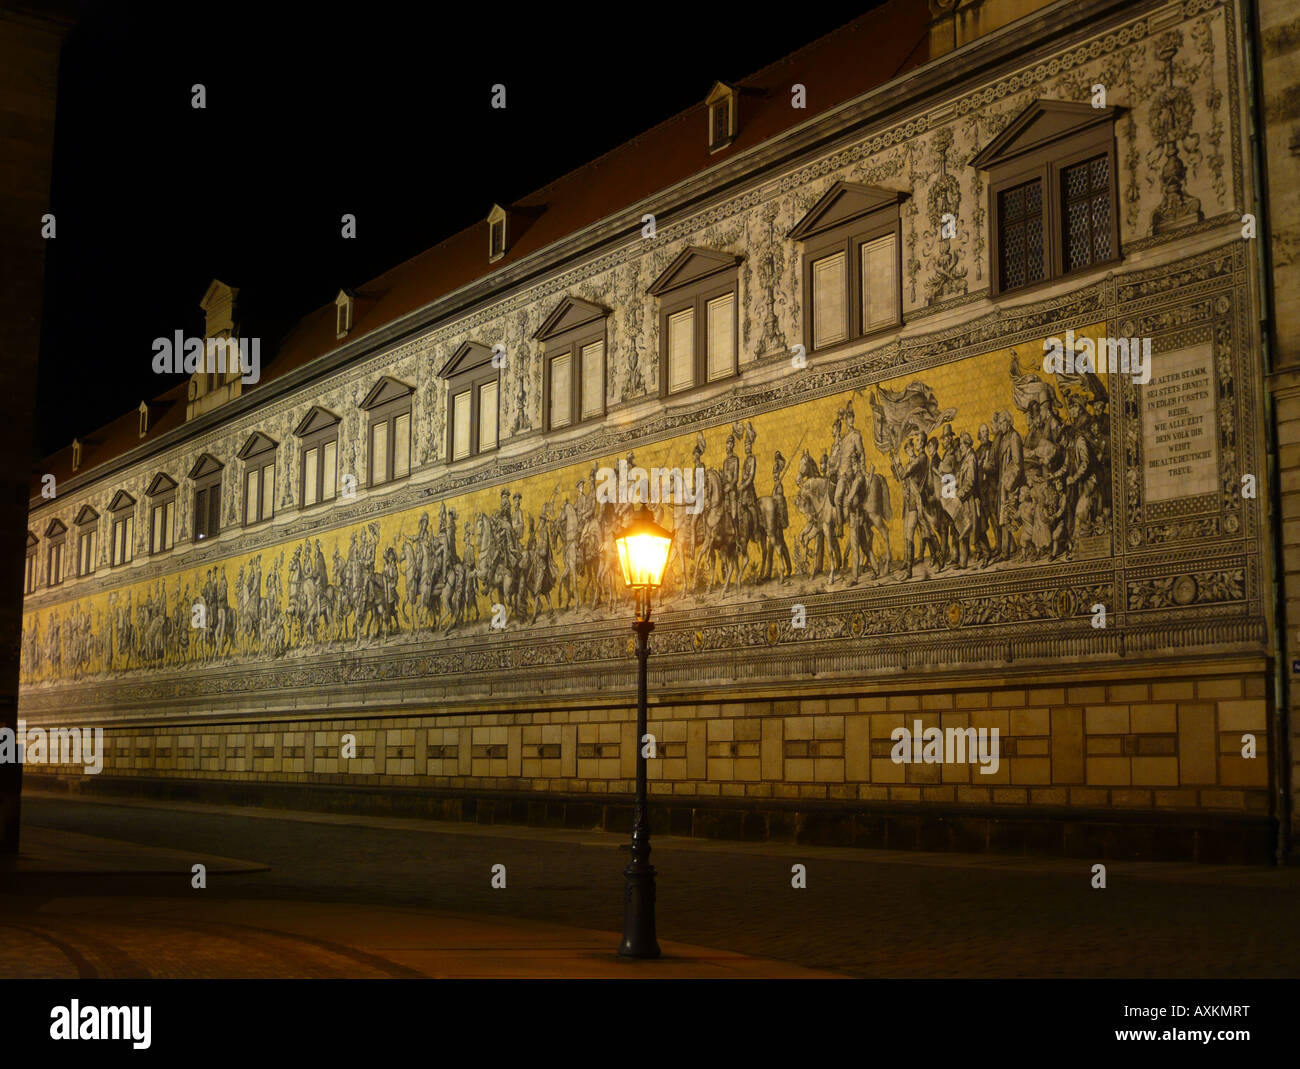 The artwork 'Fürstenzug' in the old town of Dresden at night. Stock Photo